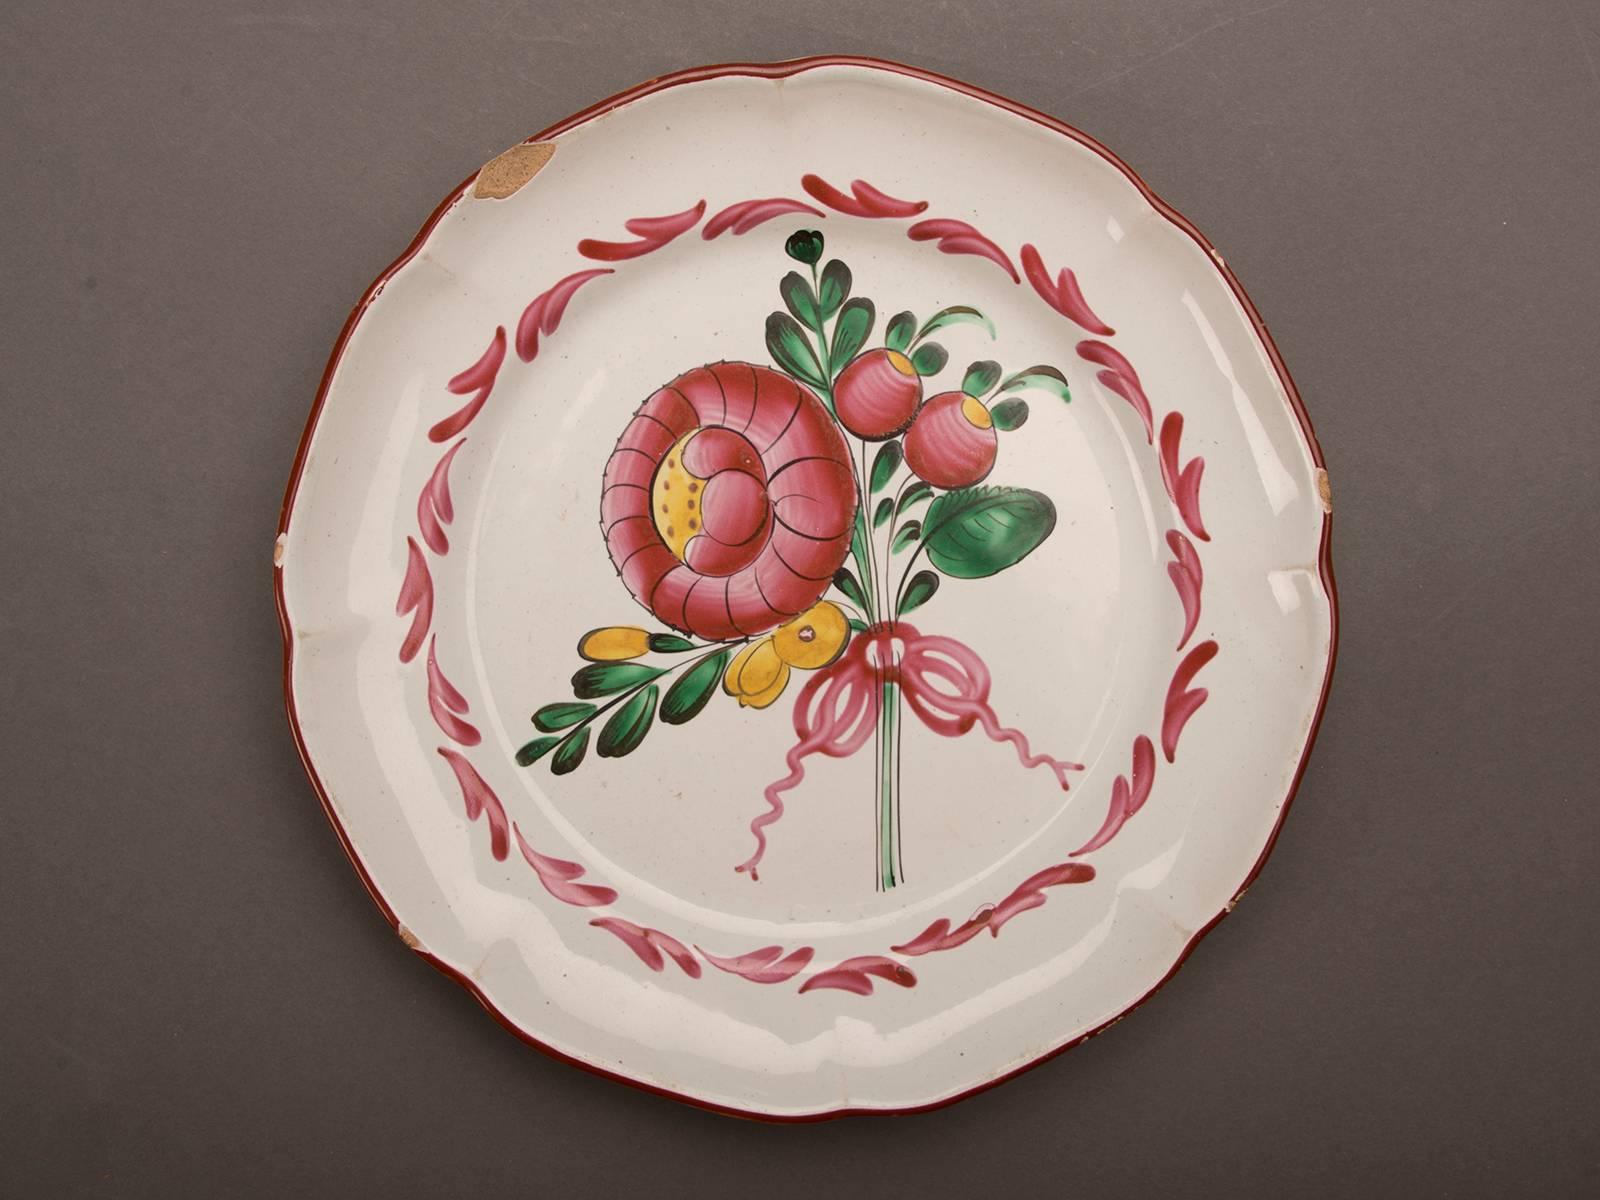 Eight Antique French Barbotine Ware Hand-Painted Plates, circa 1880 For Sale 1